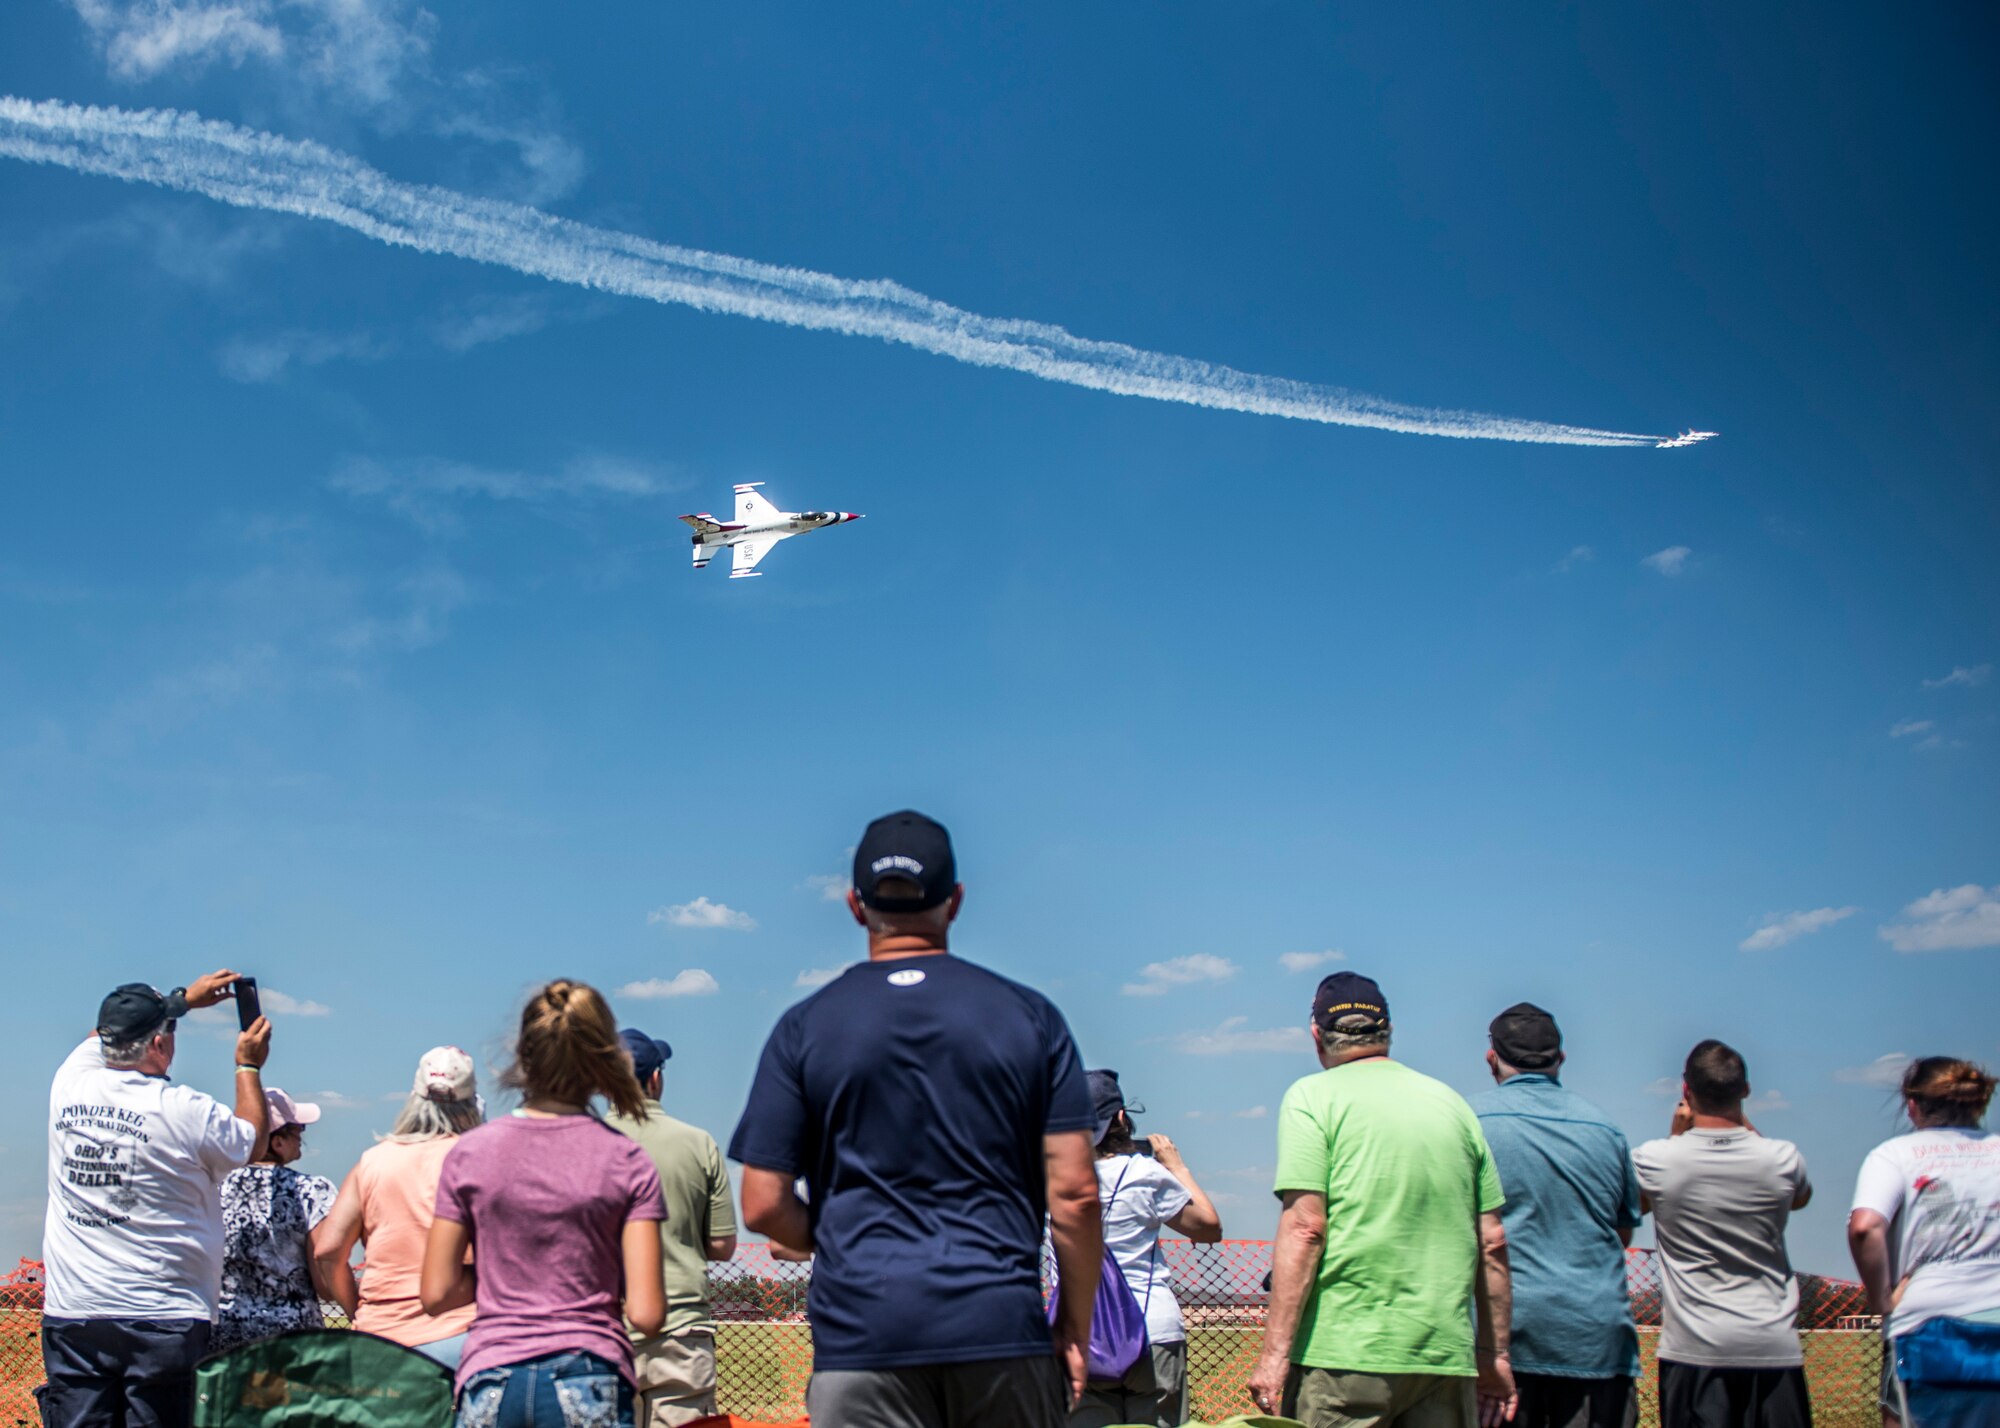 The crowd watched the Thunderbirds performance during the Scott Air Force Base Air Show, Scott Air Force Base, Ill., June 11, 2017. The base hosted the air show and open house to celebrate the 100th year of Scott AFB.  Over 50 aircraft, ranging from WWI’s Curtiss JN-4 Jenny to the currently utilized KC-135 Stratotanker, came to Scott, the fourth oldest Air Force base. Demonstrations included the Black Daggers, “Tora, Tora, Tora,” and the USAF Thunderbirds. Opened in 1917 and previously named Scott Field, the base has seen its mission evolve and expand to encompass a multitude of priorities, including aeromedical evacuation and communications.  Today, Scott is home to 31 mission partners and provides around-the-clock logistics support and rapid global mobility, carried out primarily by U.S. Transportation Command and Air Mobility Command.